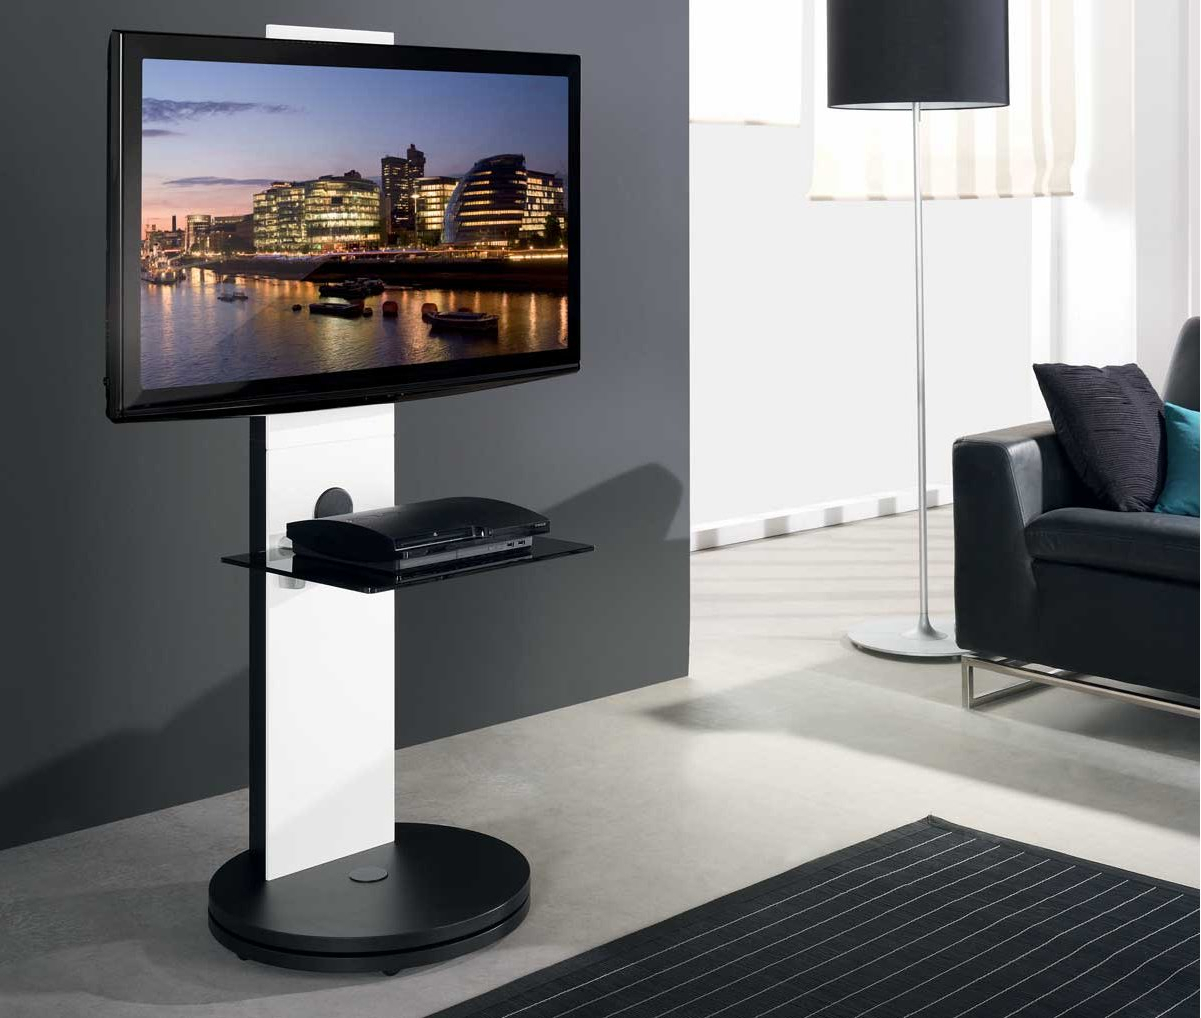 Find a suitable TV stand for your entertainment center in Israel